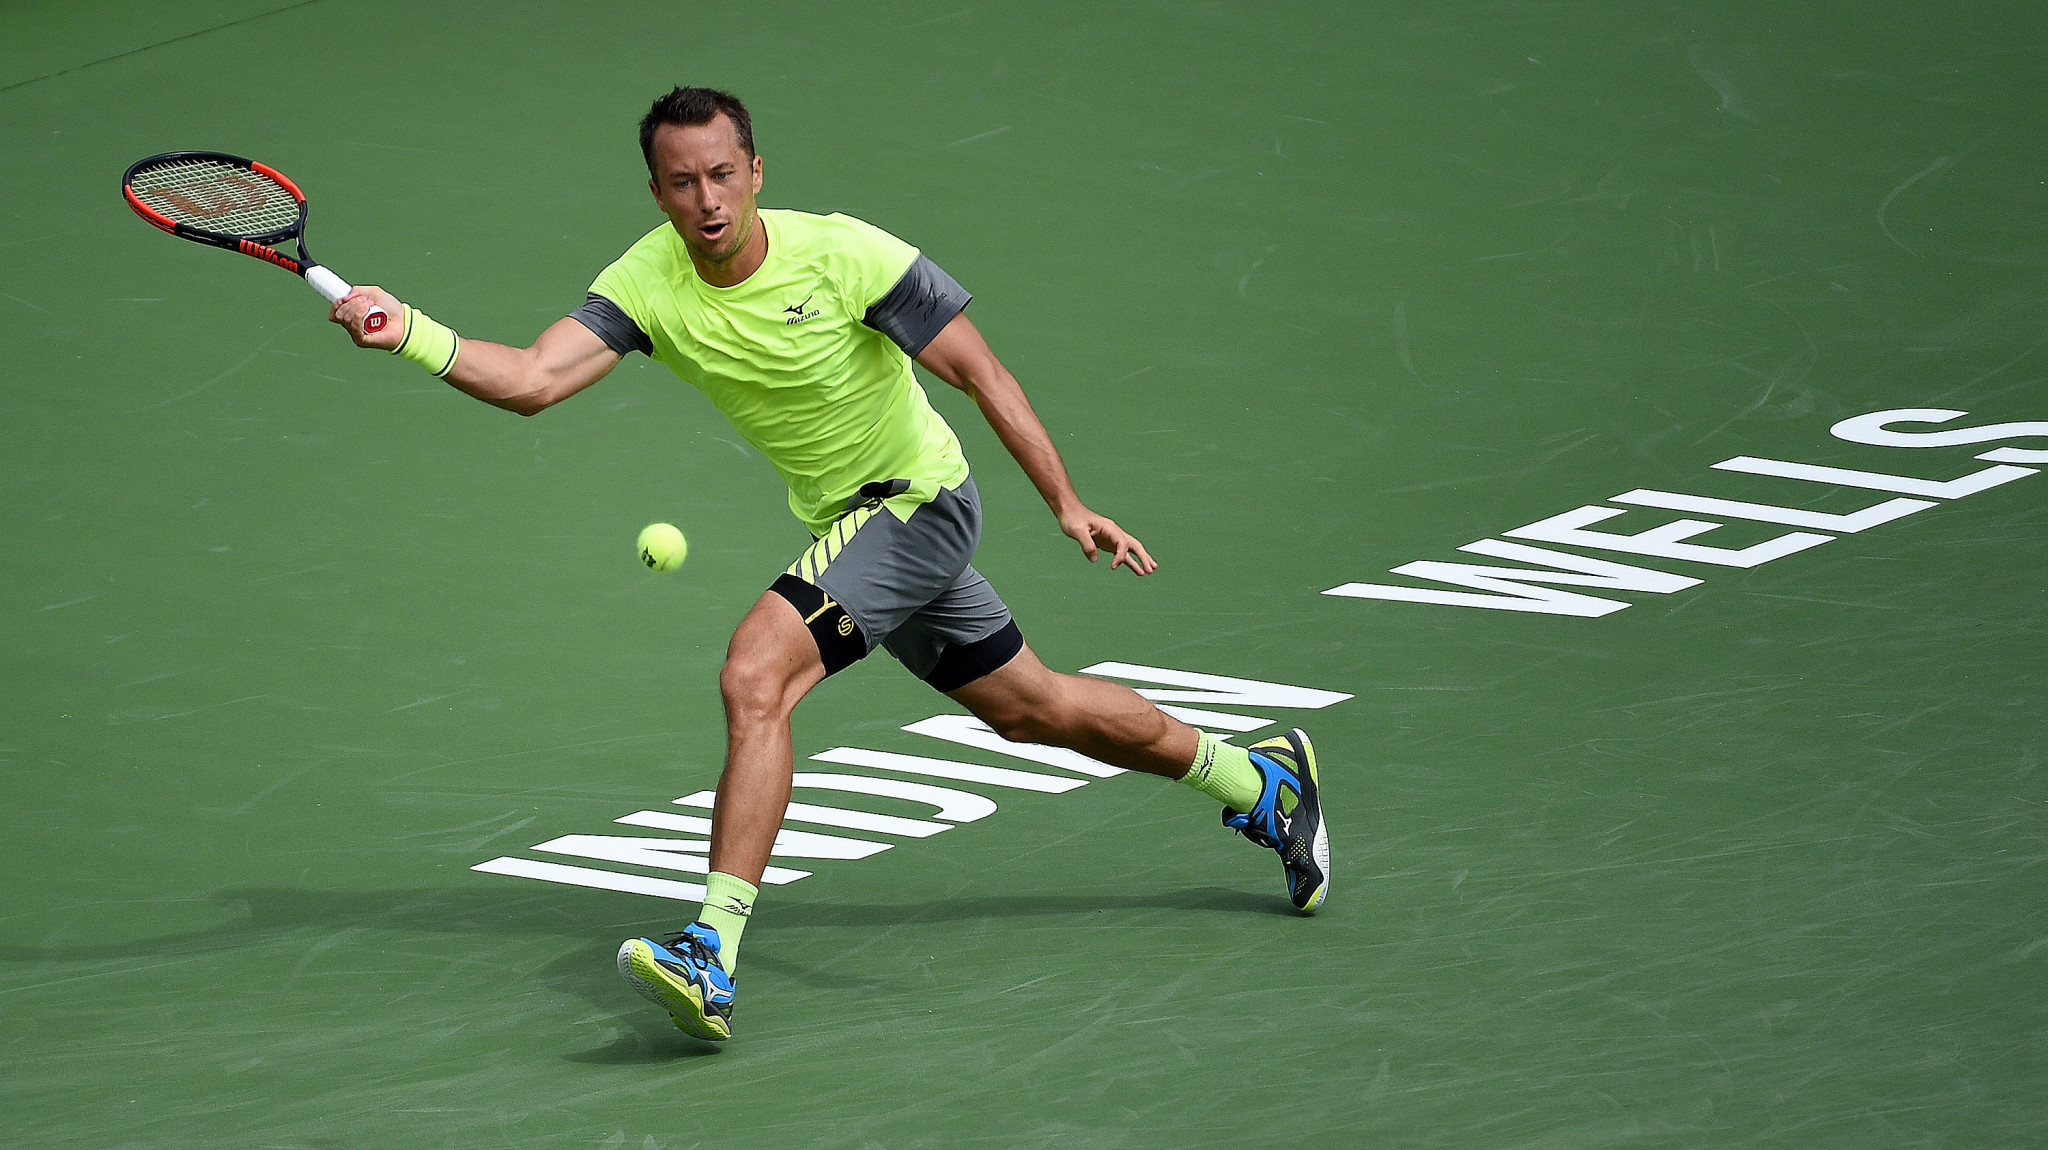 Germany's Philipp Kohlschreiber stunned Marin Cilic of Croatia to reach the next round ©Getty Images